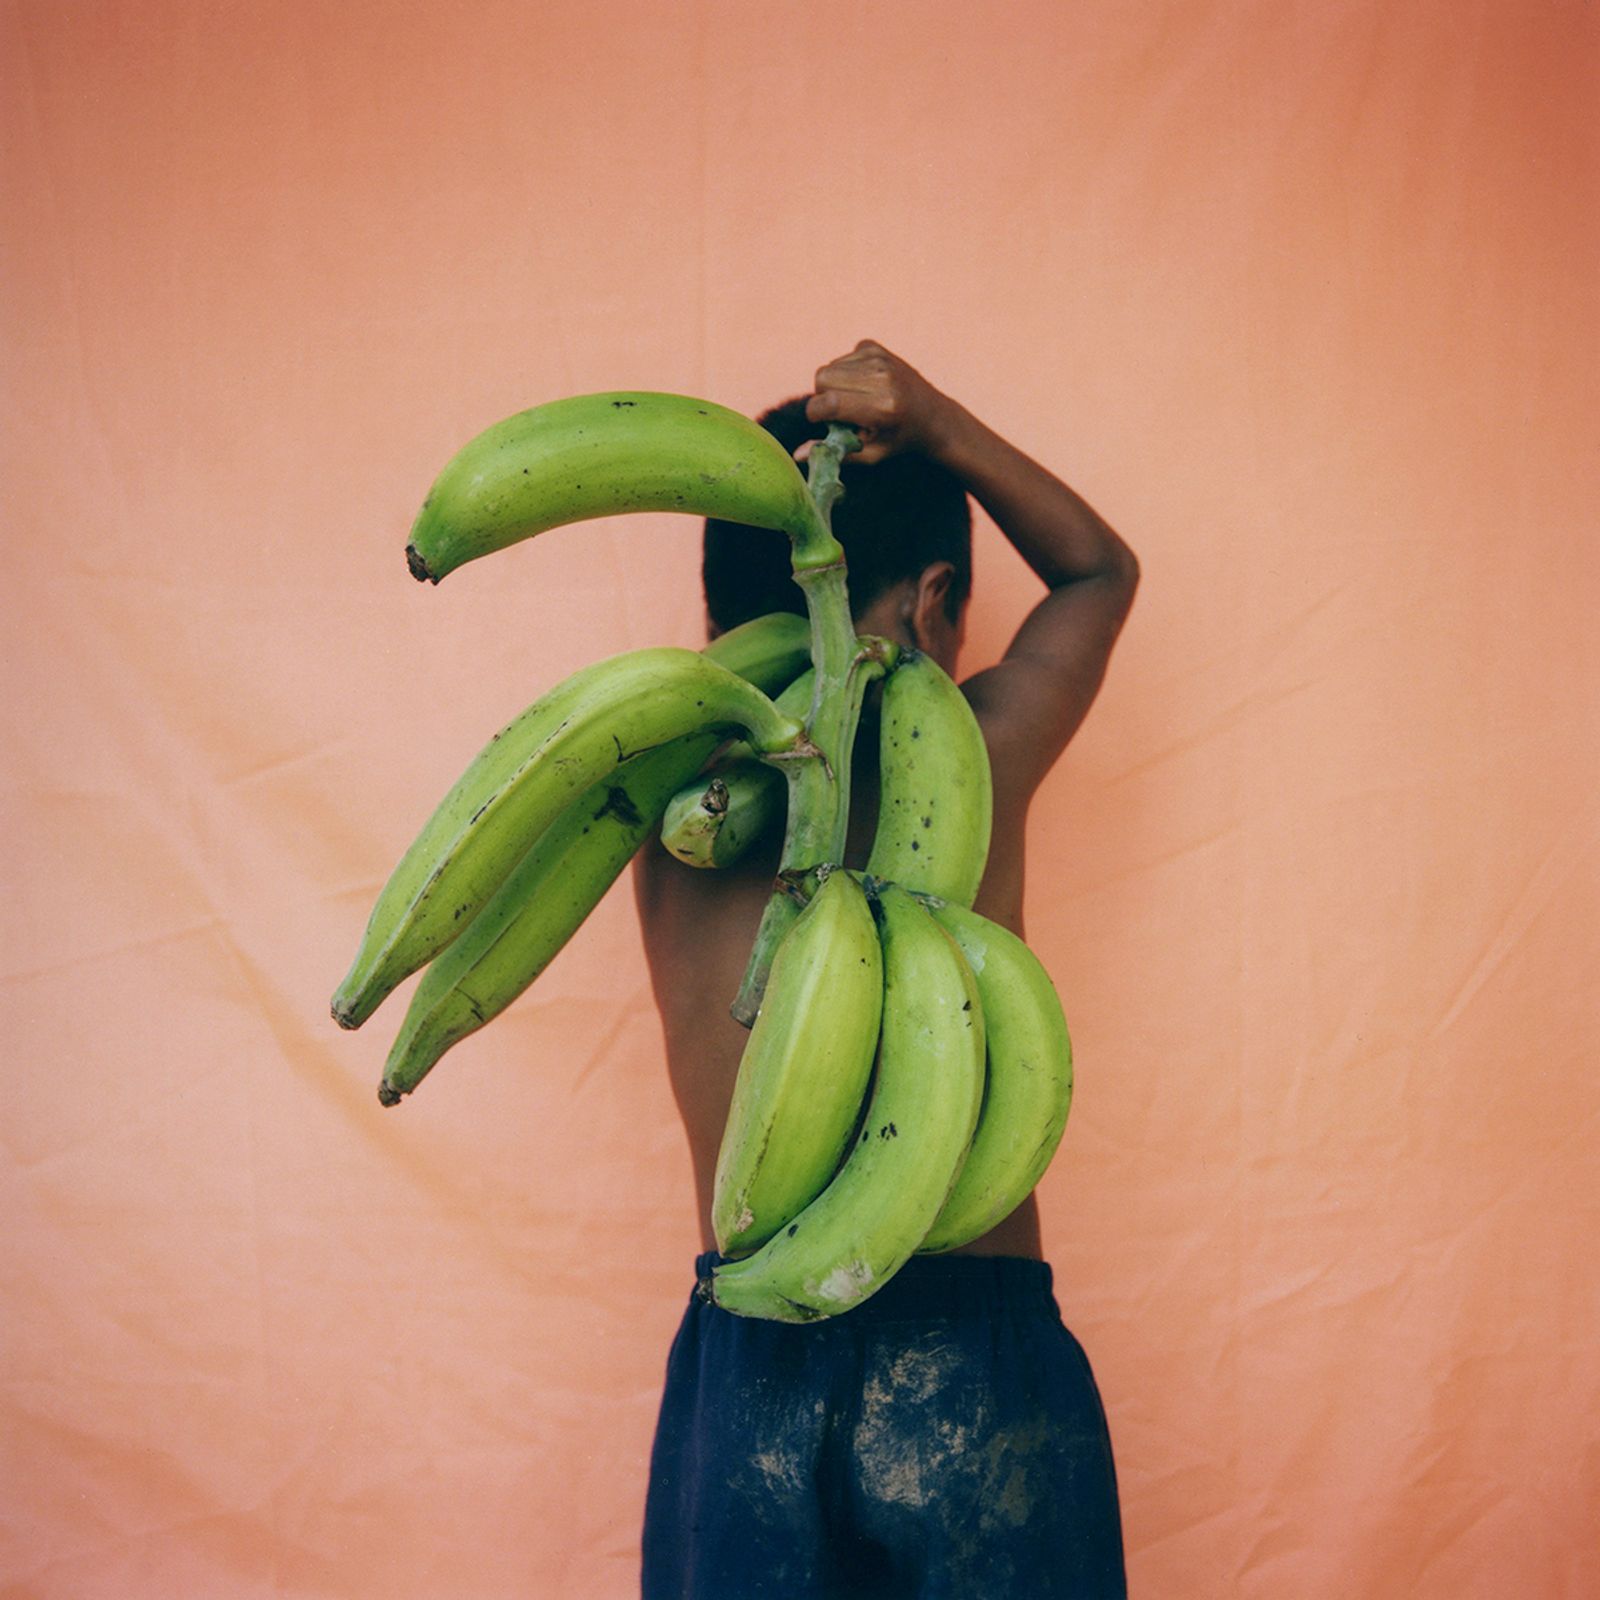 © Karen Paulina Biswell - Image from the nama bu photography project